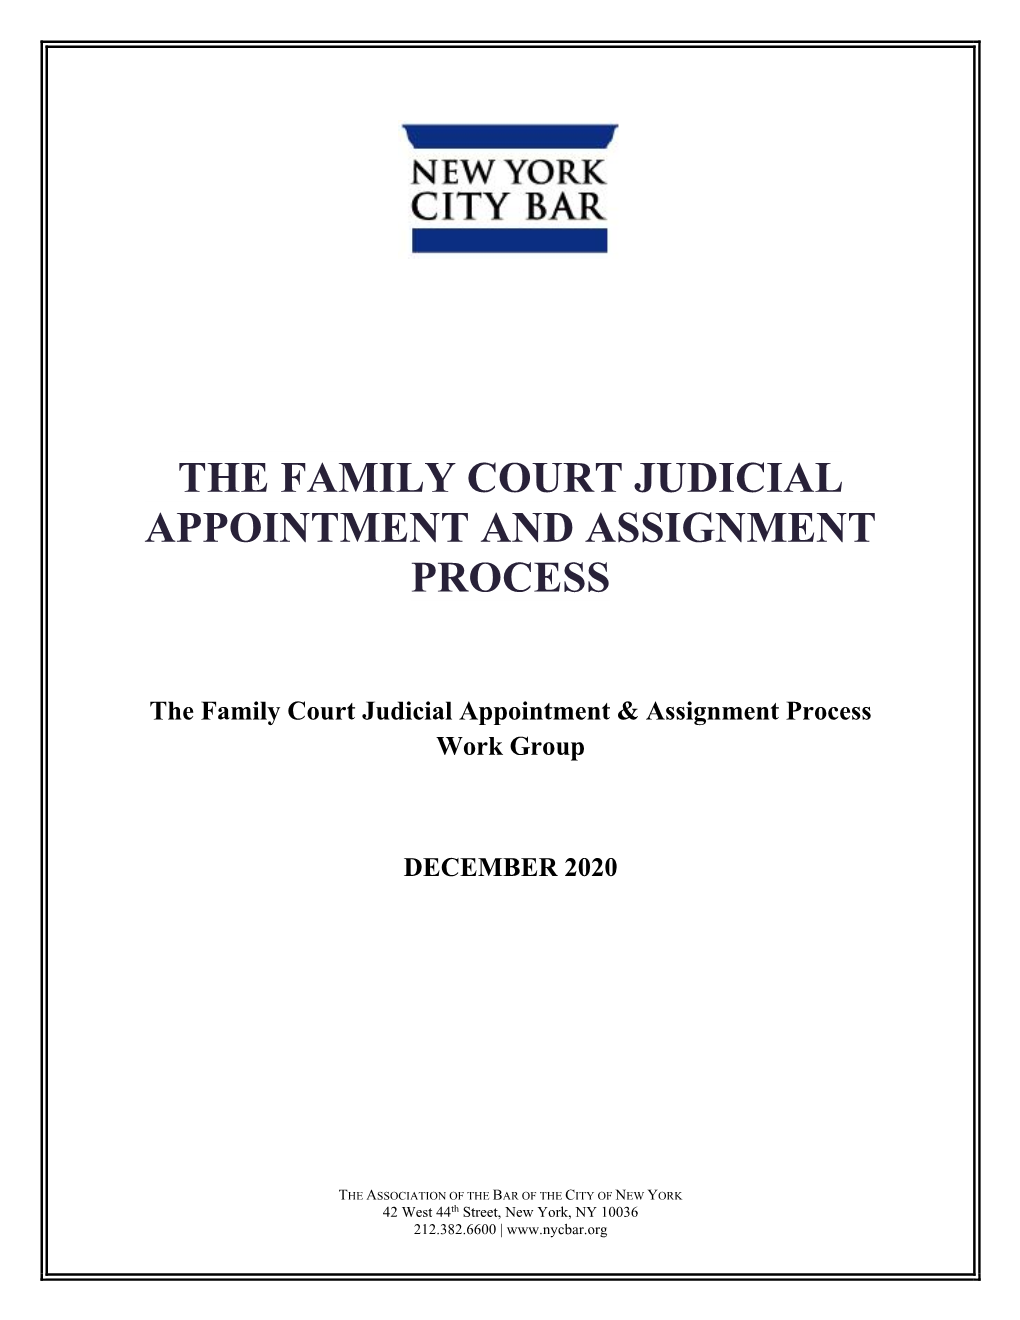 The Family Court Judicial Appointment and Assignment Process